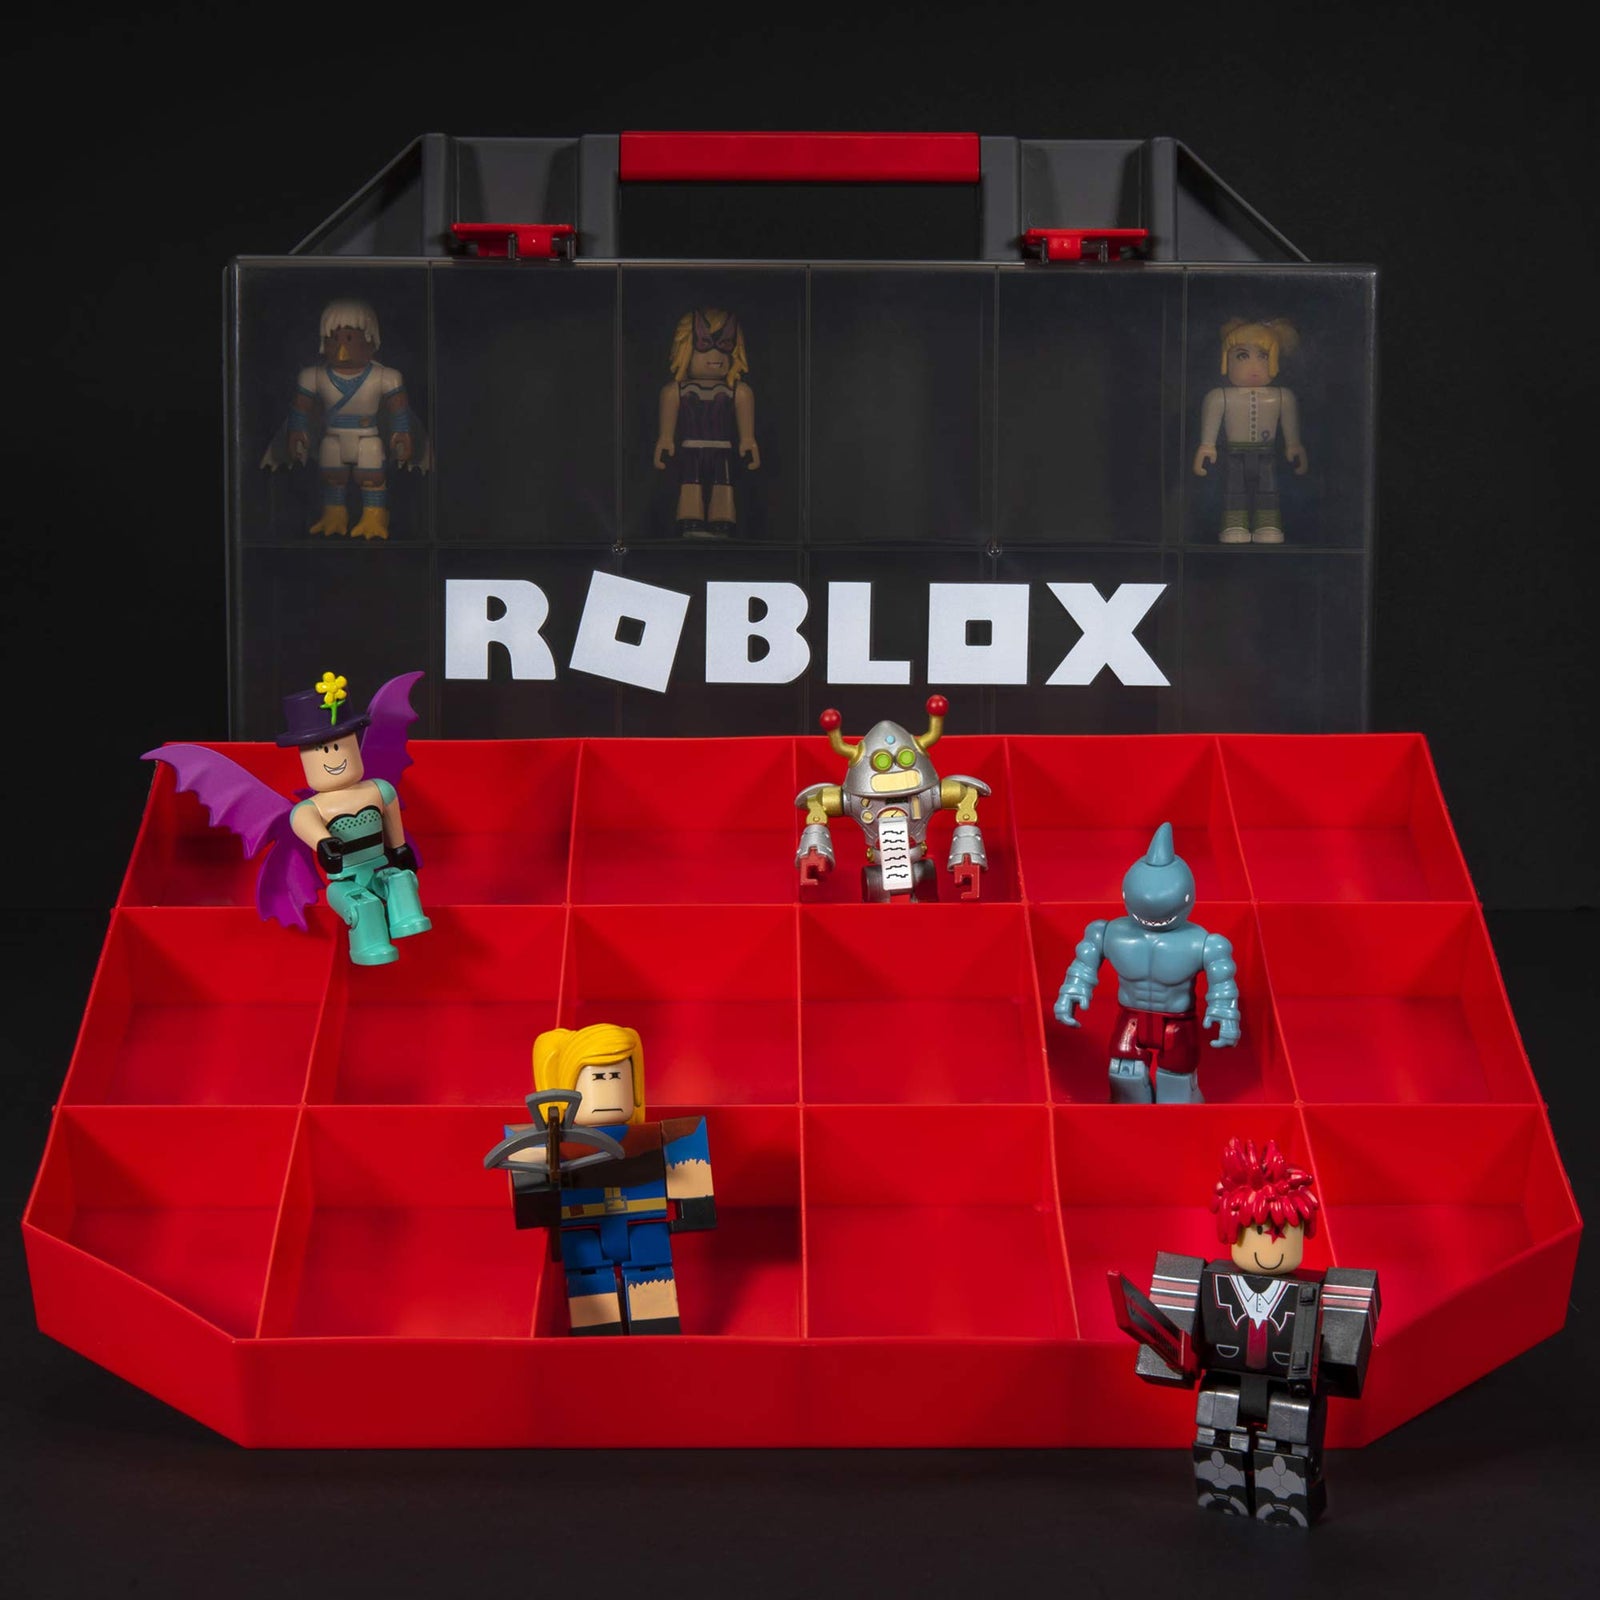 Roblox Action Collection - Collector's Tool Box and Carry Case that Holds 32 Figures [Includes Exclusive Virtual Item] - Amazon Exclusive